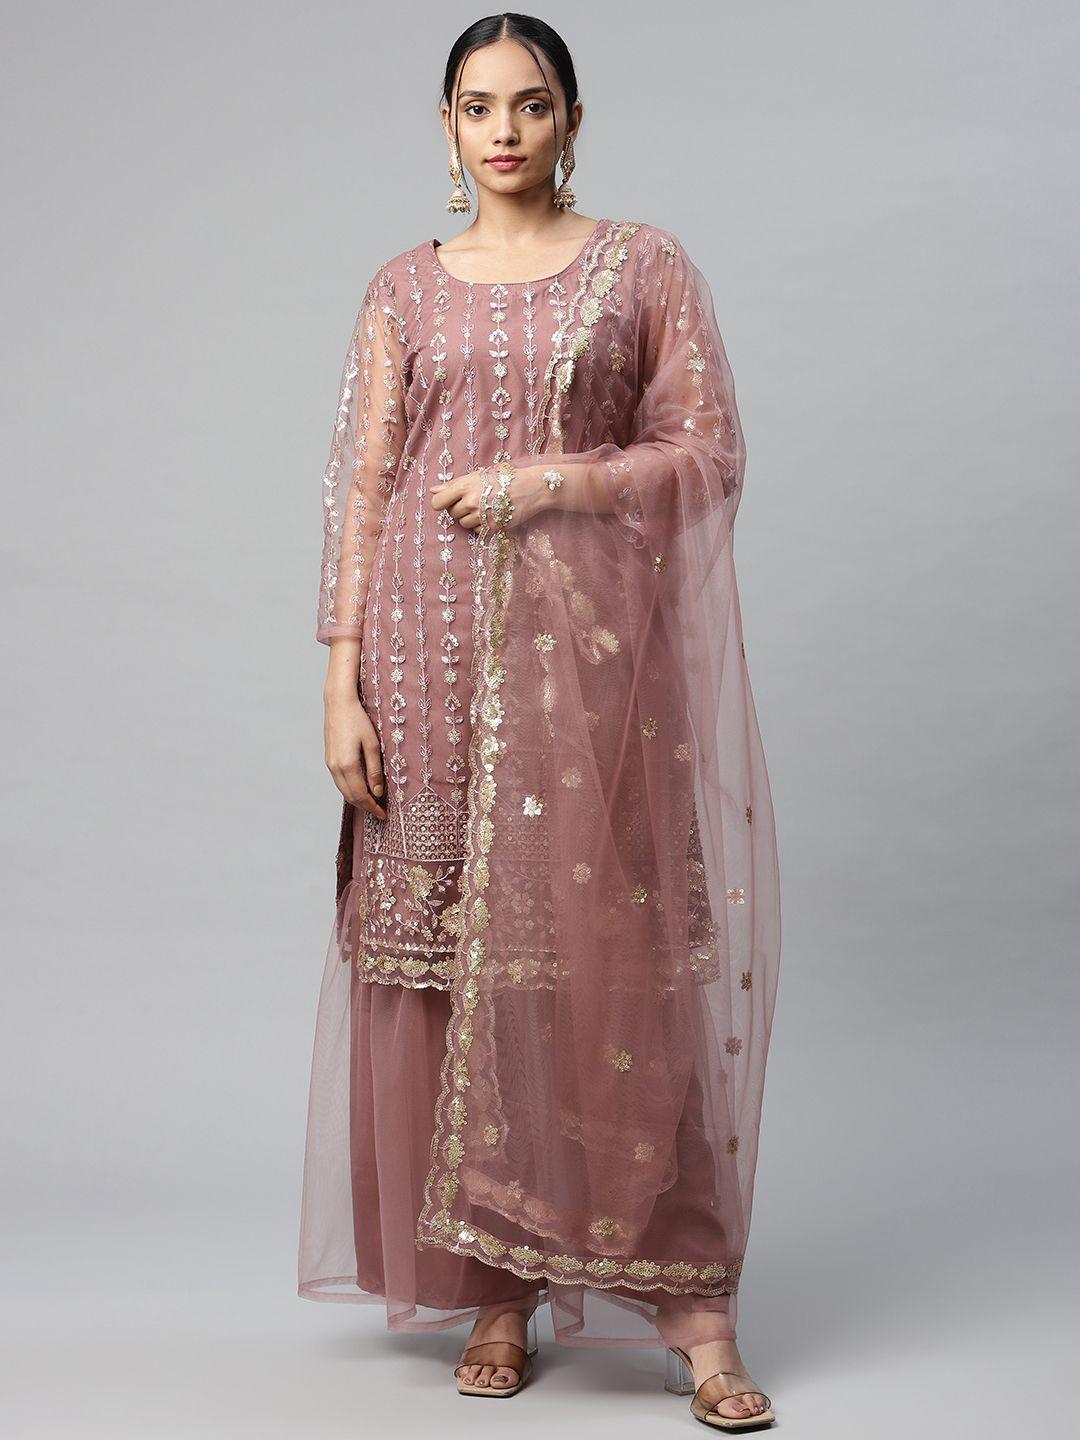 Readiprint Fashions Mauve & Gold-Toned Embroidered Unstitched Dress Material